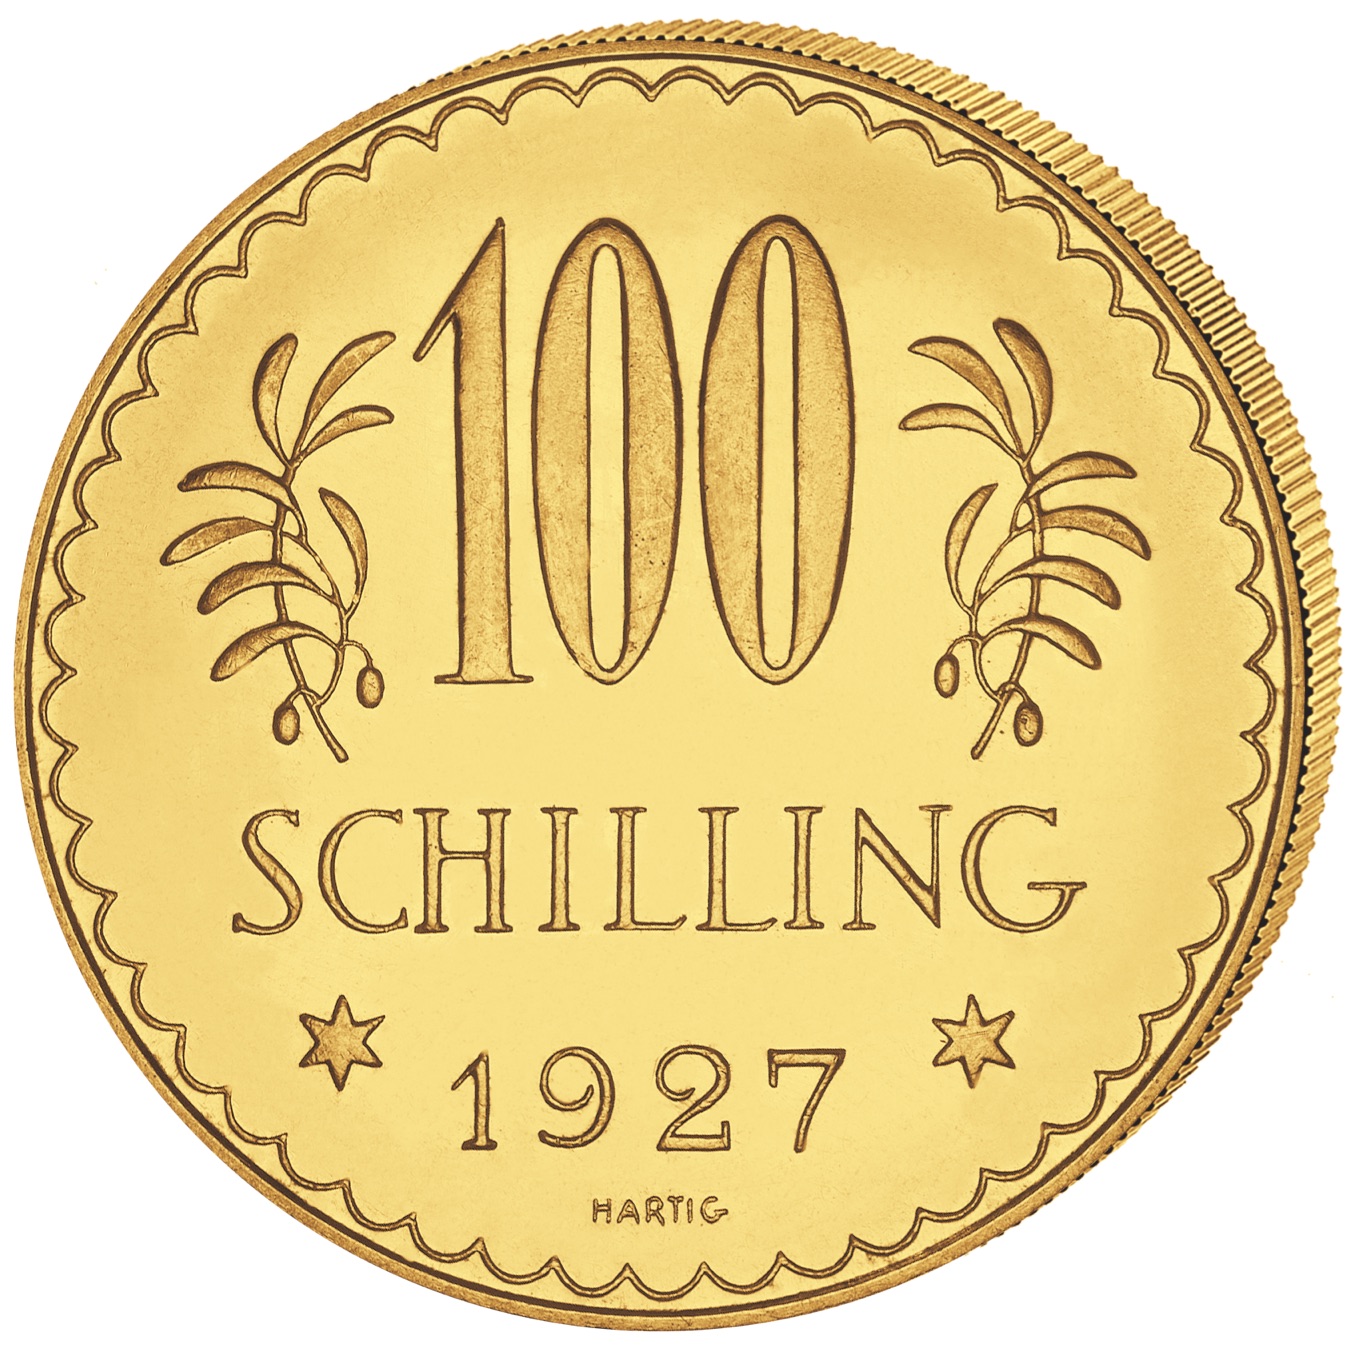 AT 100 Schilling 1930